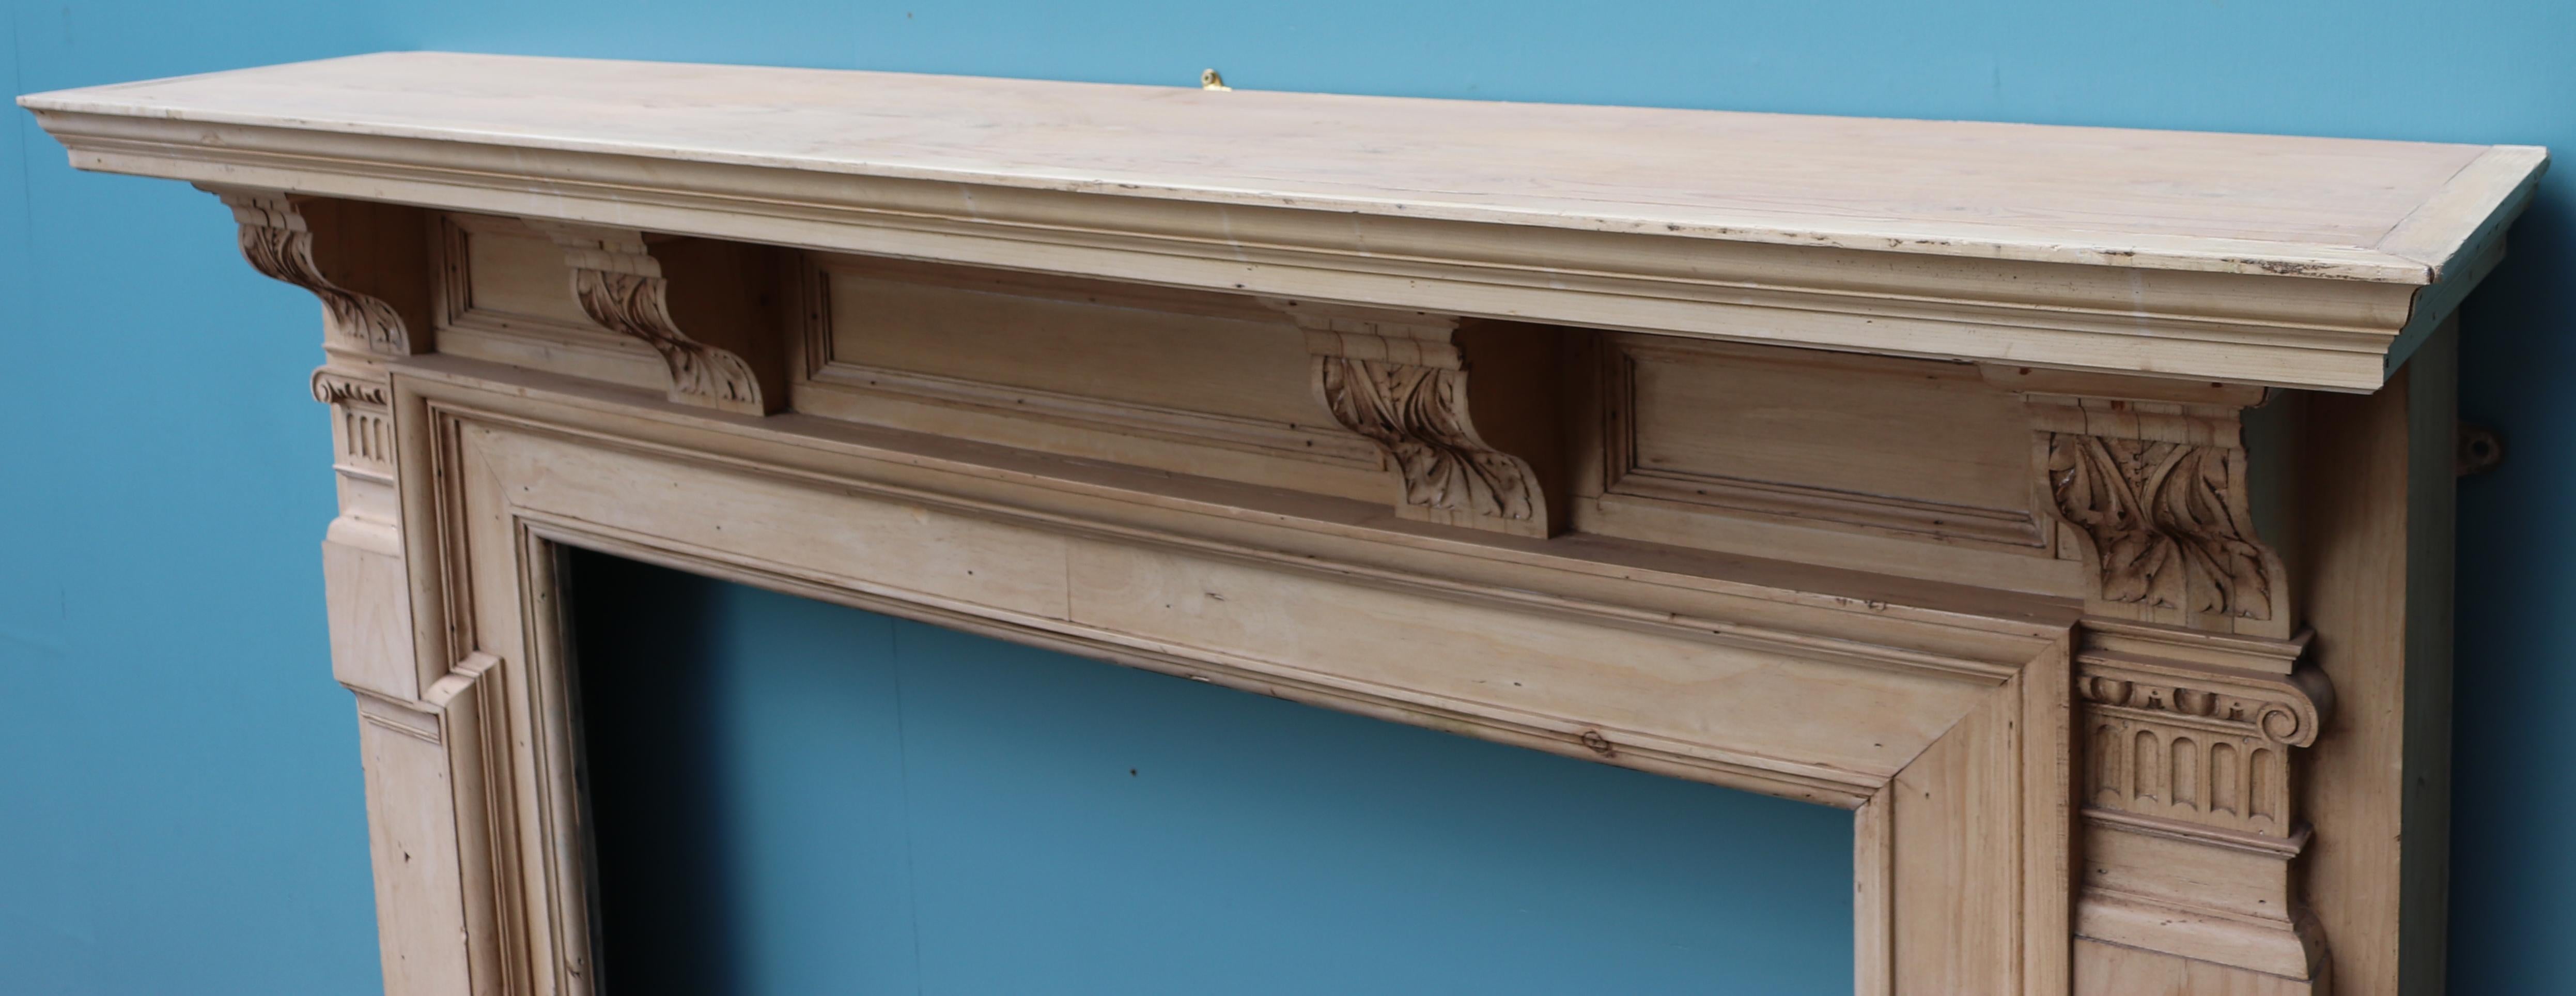 Victorian Carved Pine Fire Surround 1